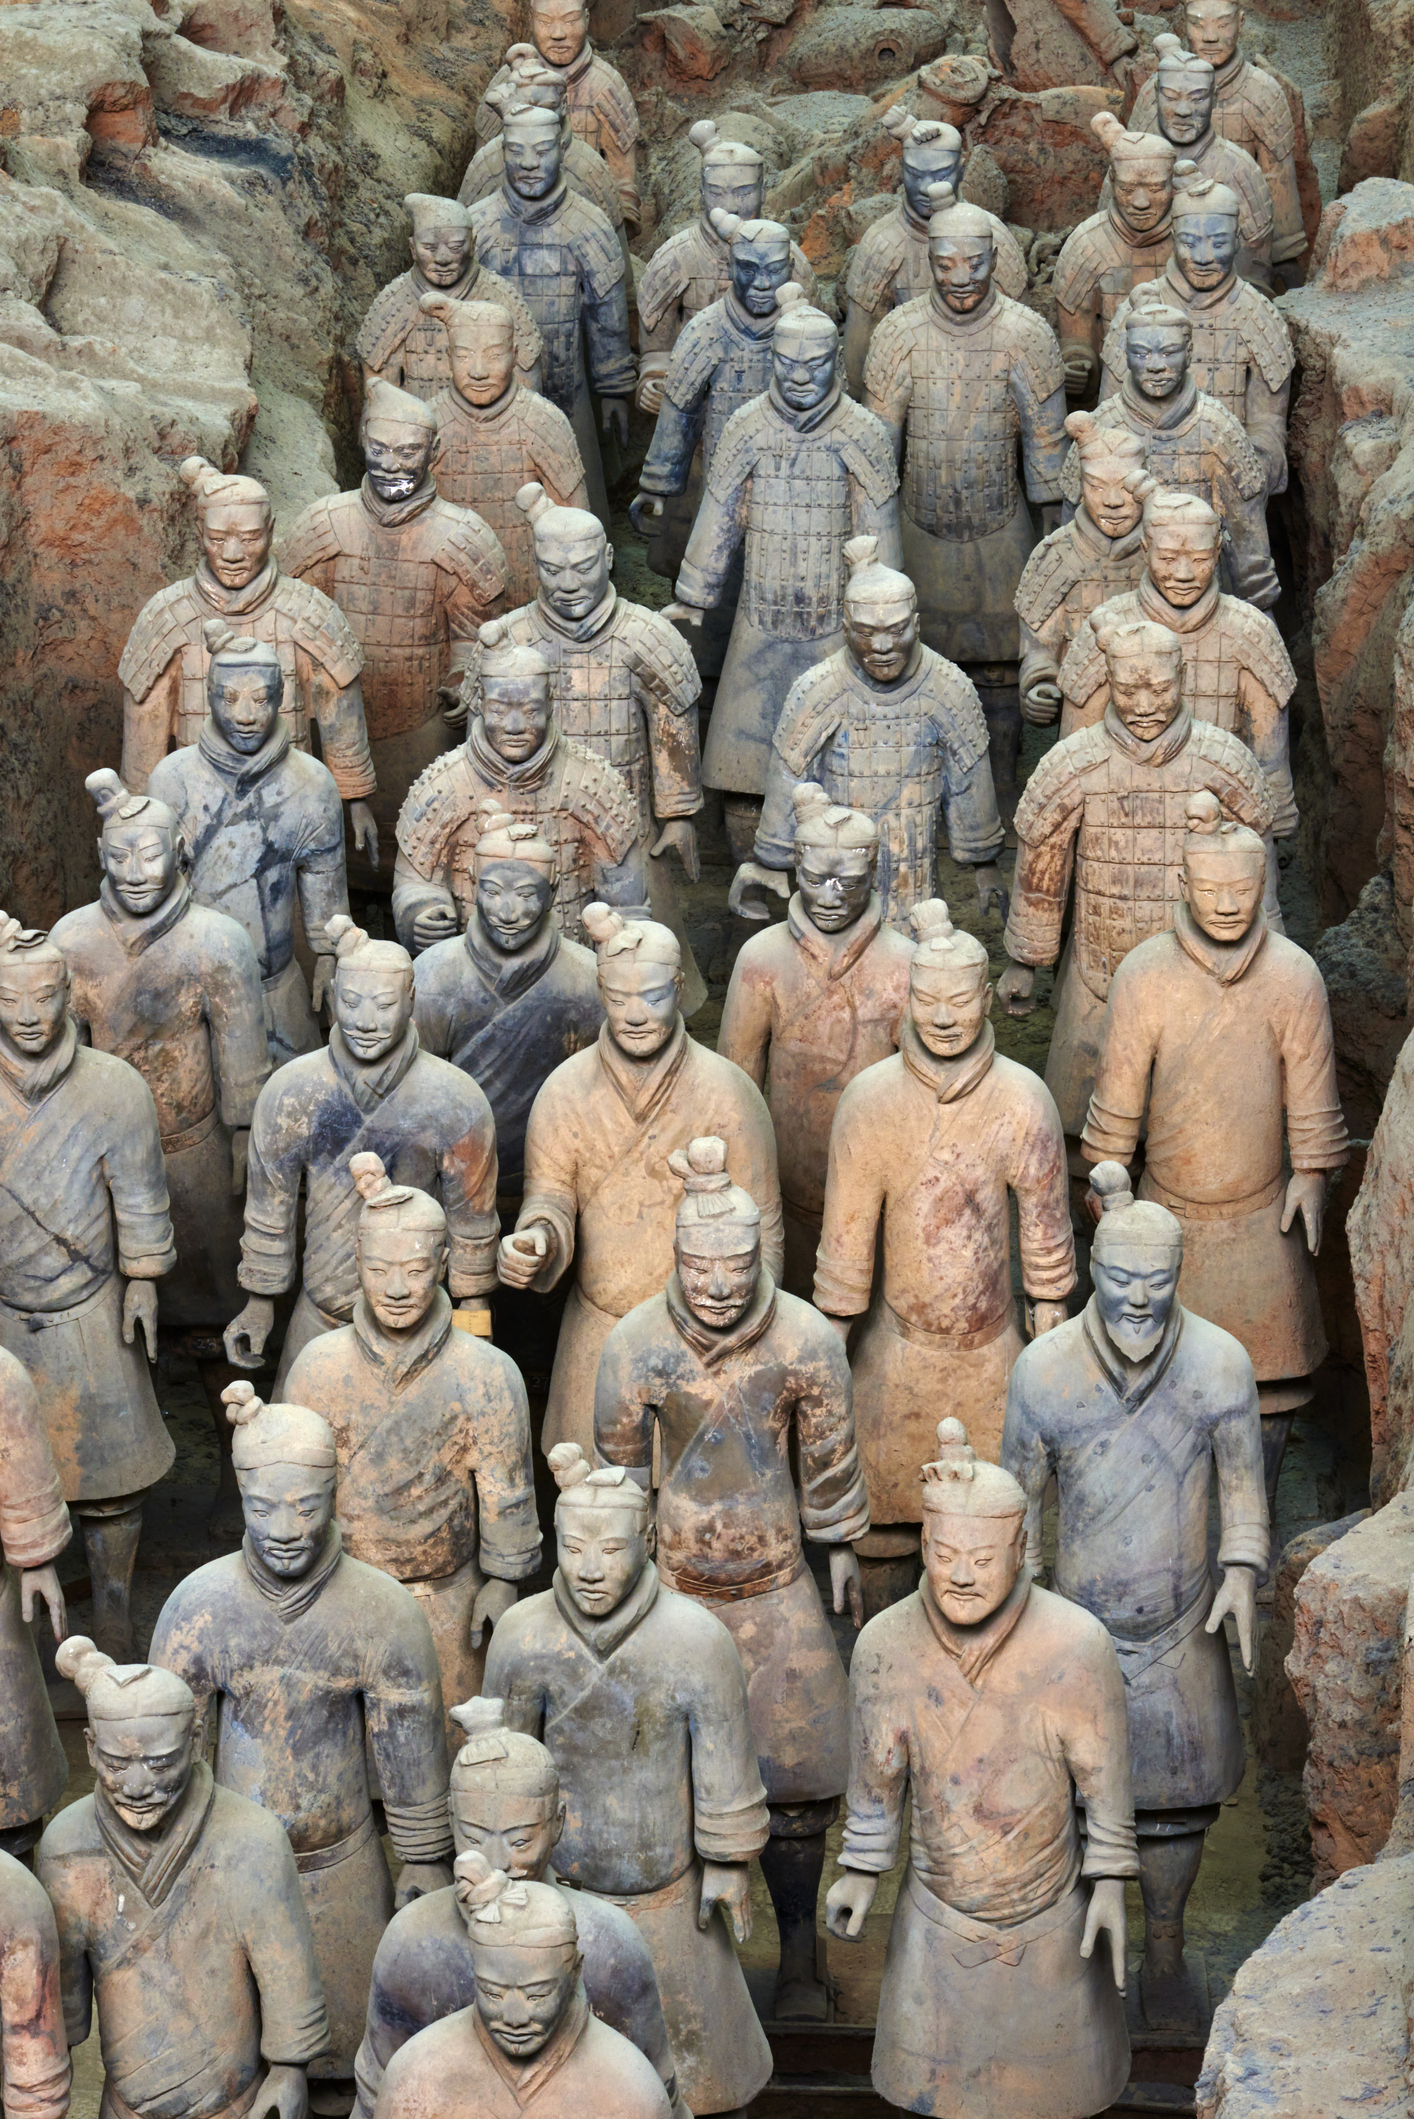 Terracotta Army statues standing in excavation pits at the Mausoleum of the First Qin Emperor in China